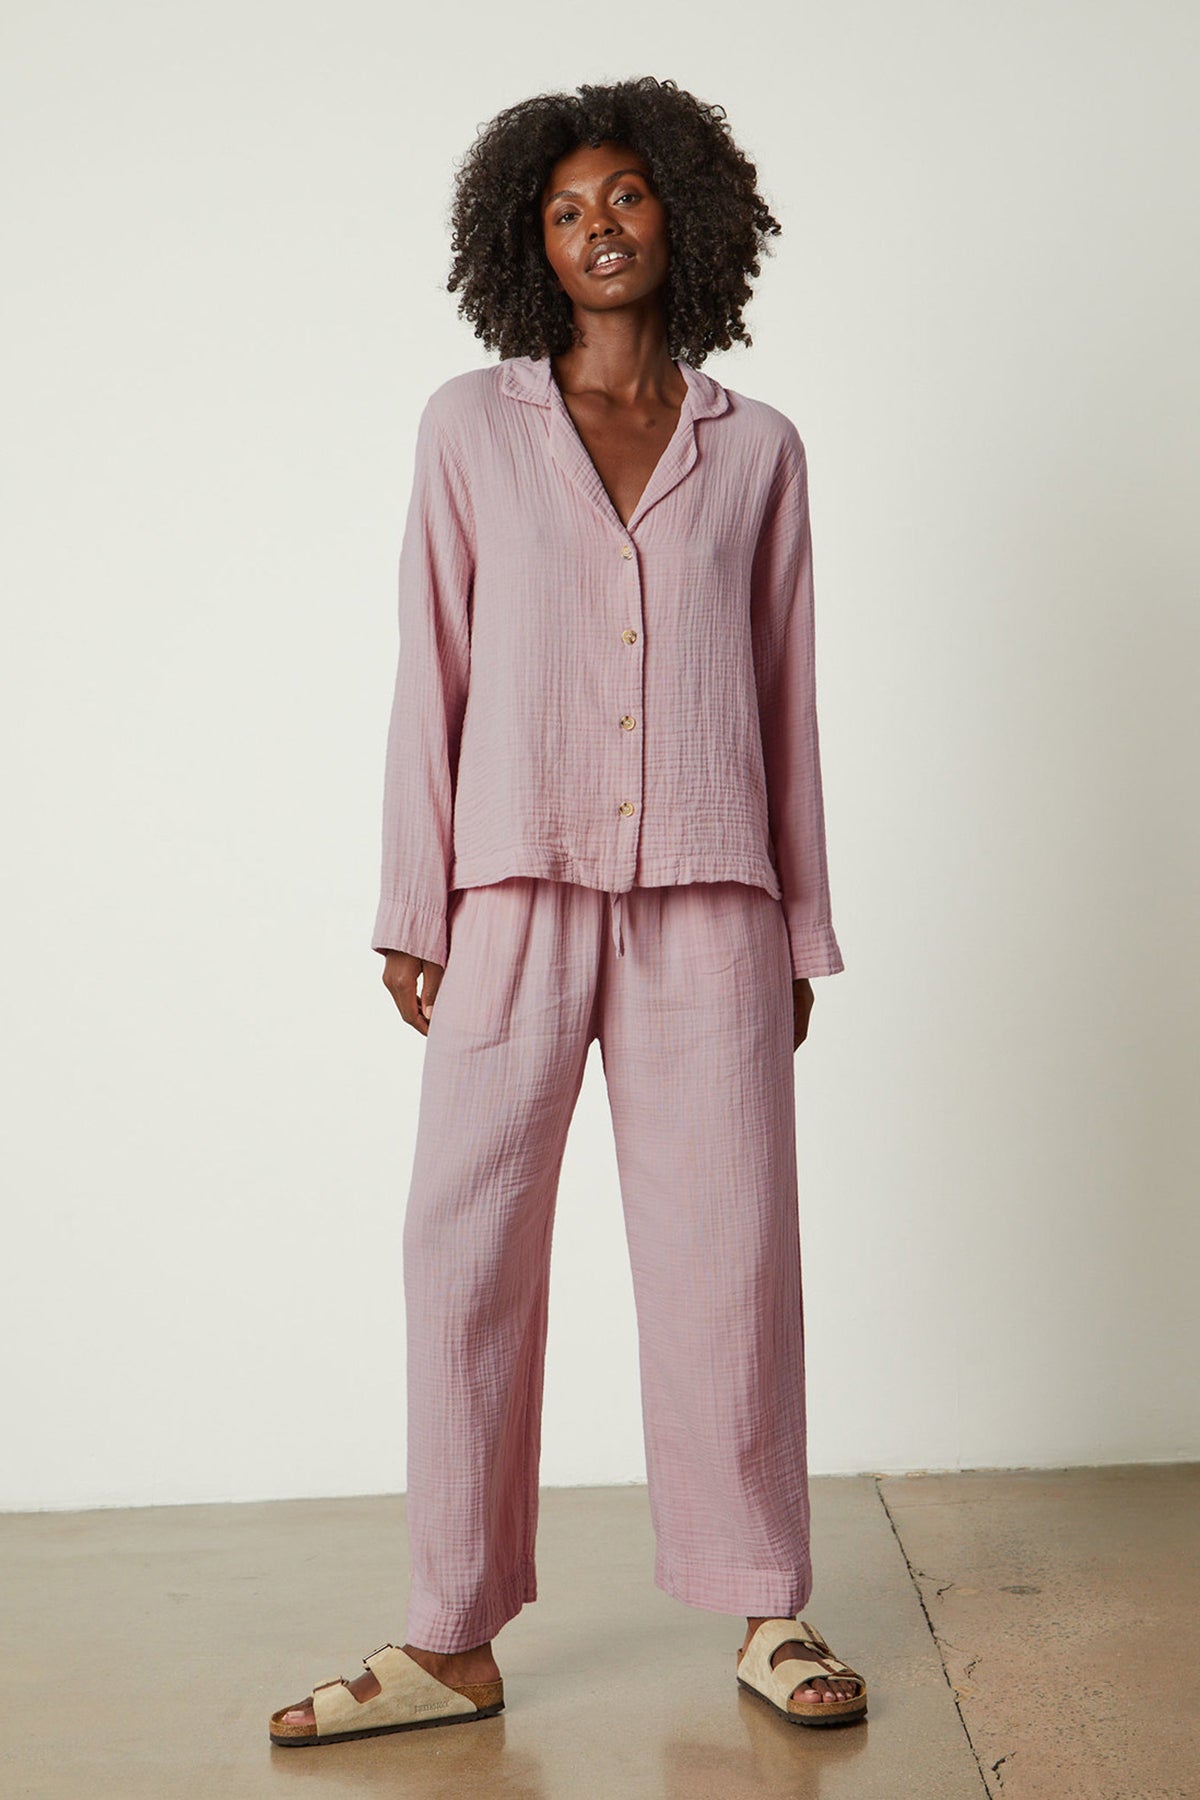 The model is wearing a pink Jenny Graham Home PAJAMA PANT set.-26311382565057